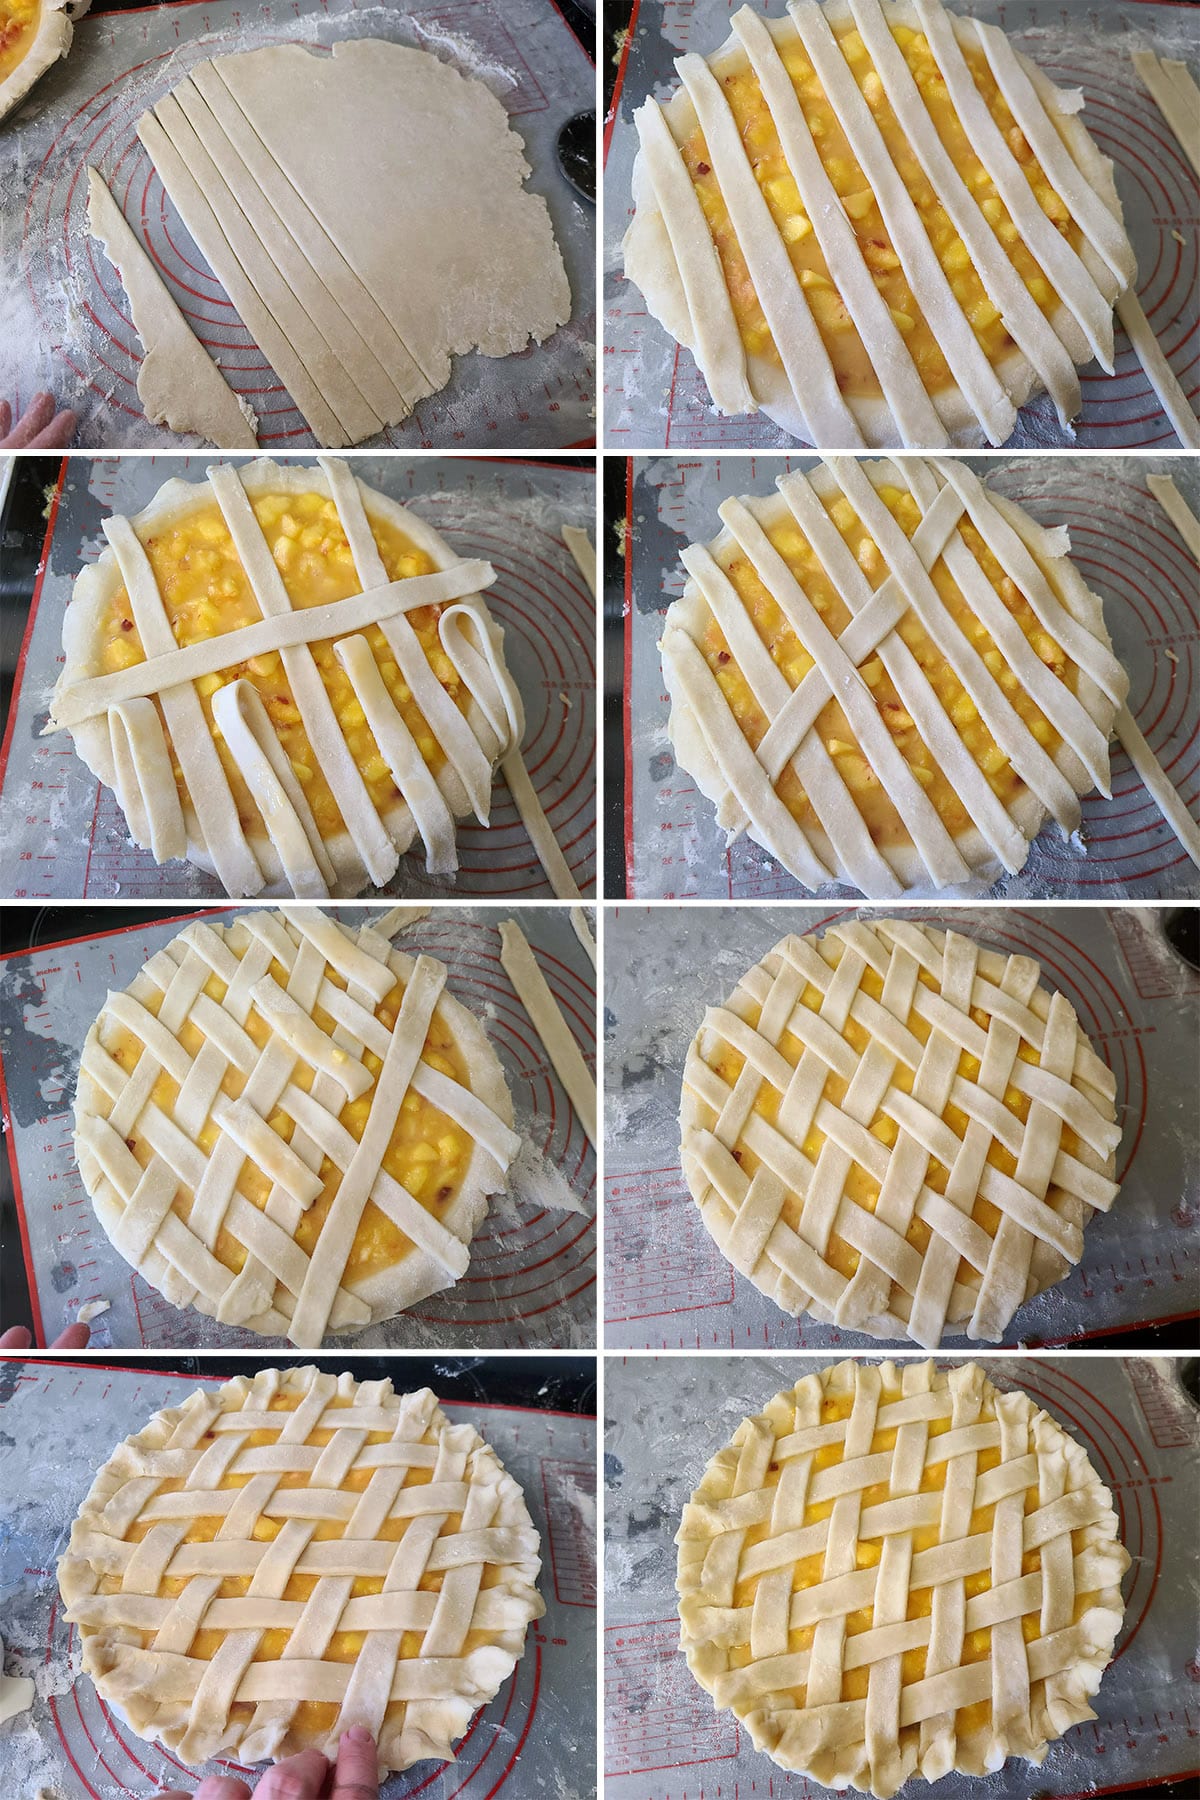 An 8 part image showing pie crust being worked into a lattice topping on a peach pie.